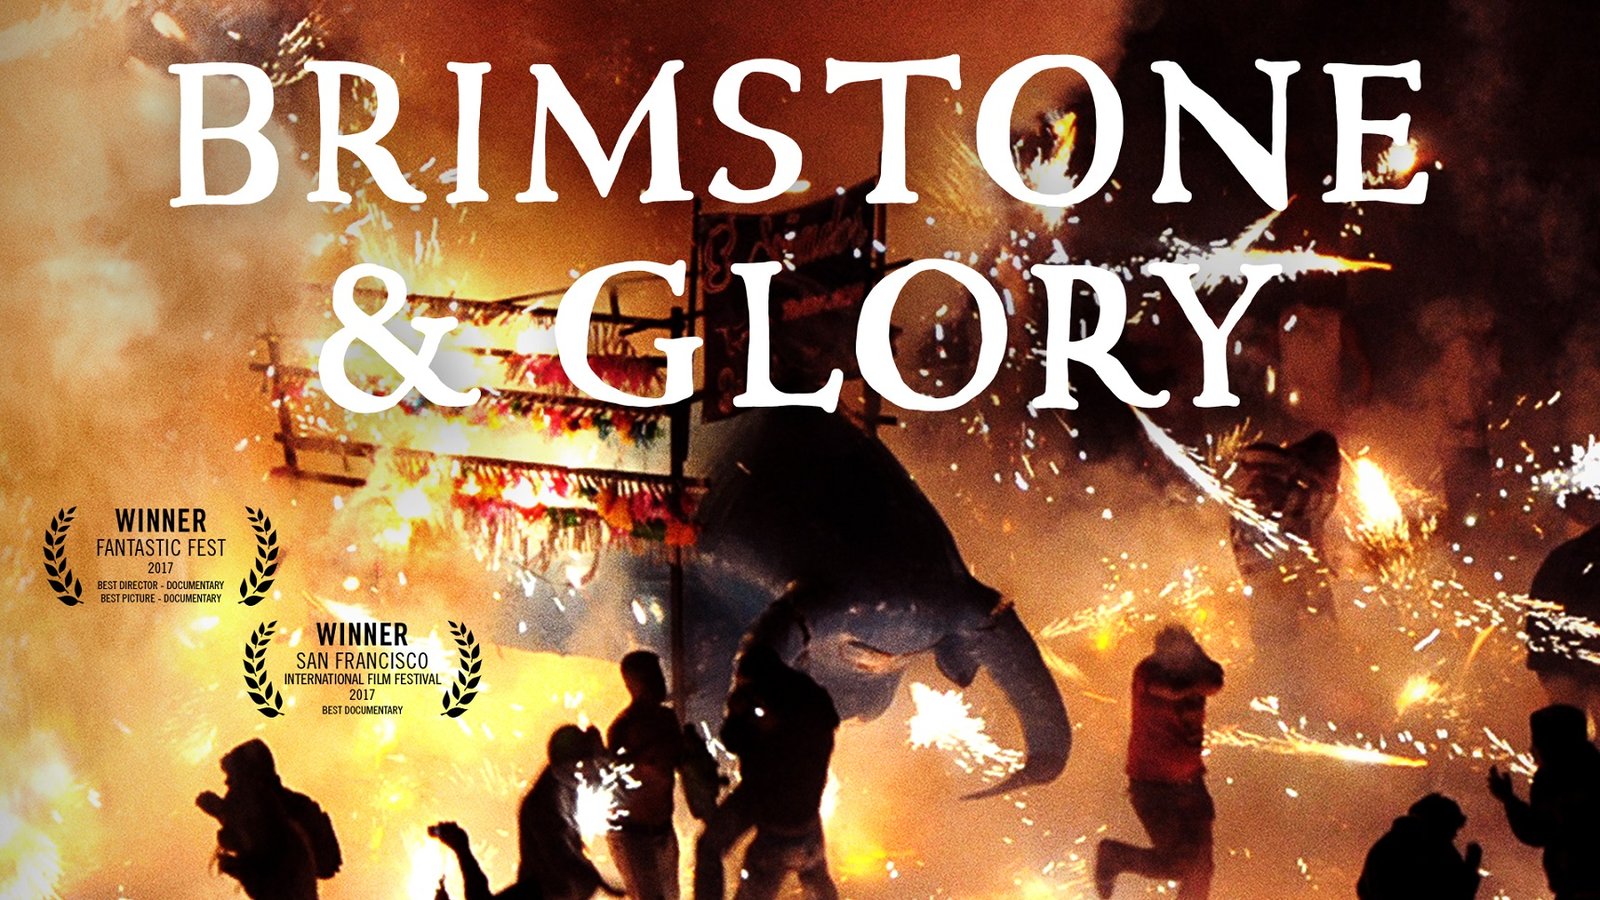 Brimstone & Glory - The Ritual, Danger and Beauty of Fireworks